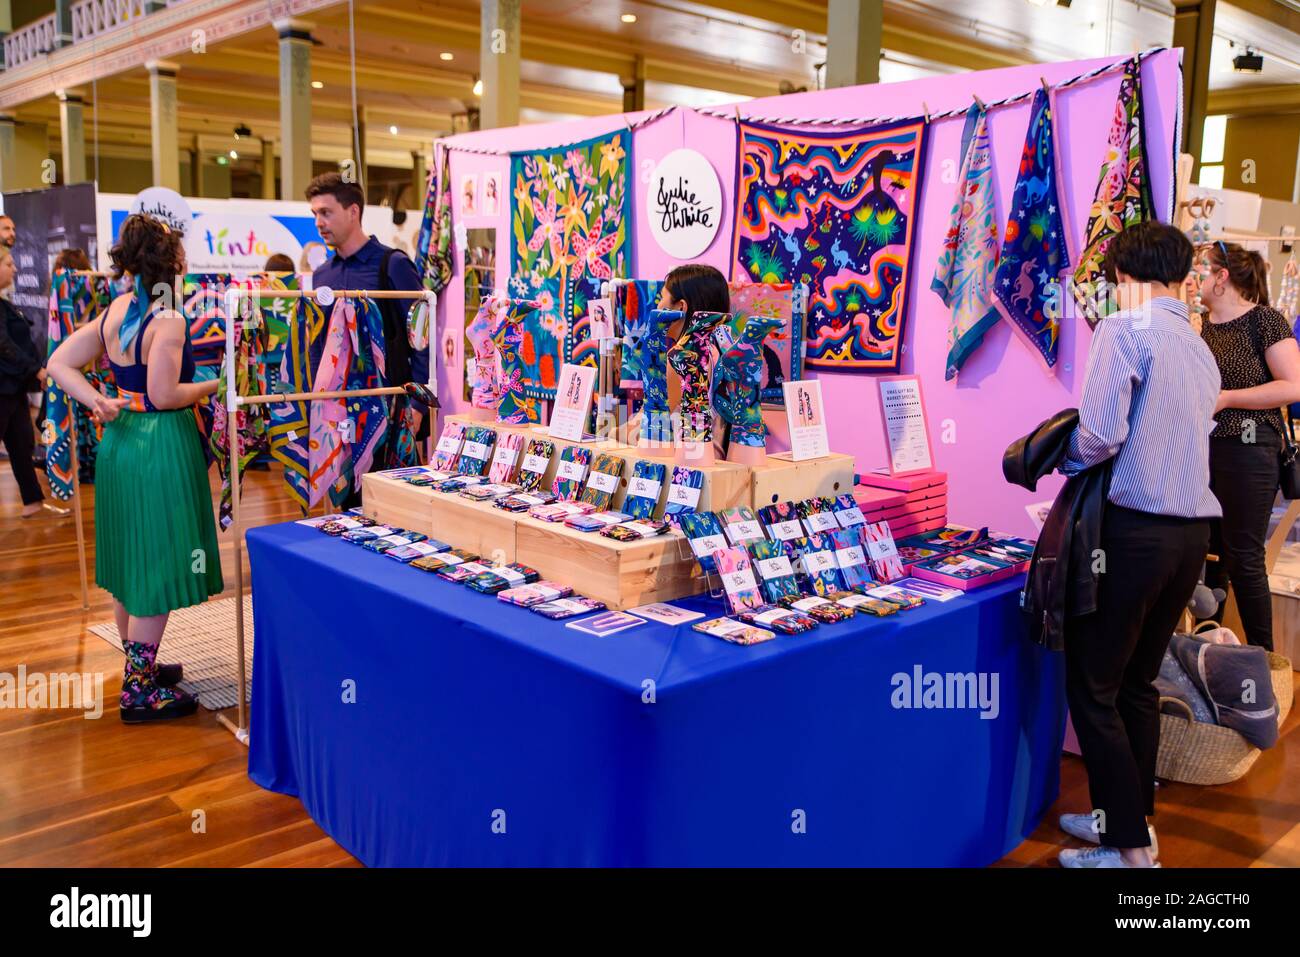 Stalls at the Big Design Market for Christmas shopping at the Royal Exhibition Building in Melbourne, Australia Stock Photo